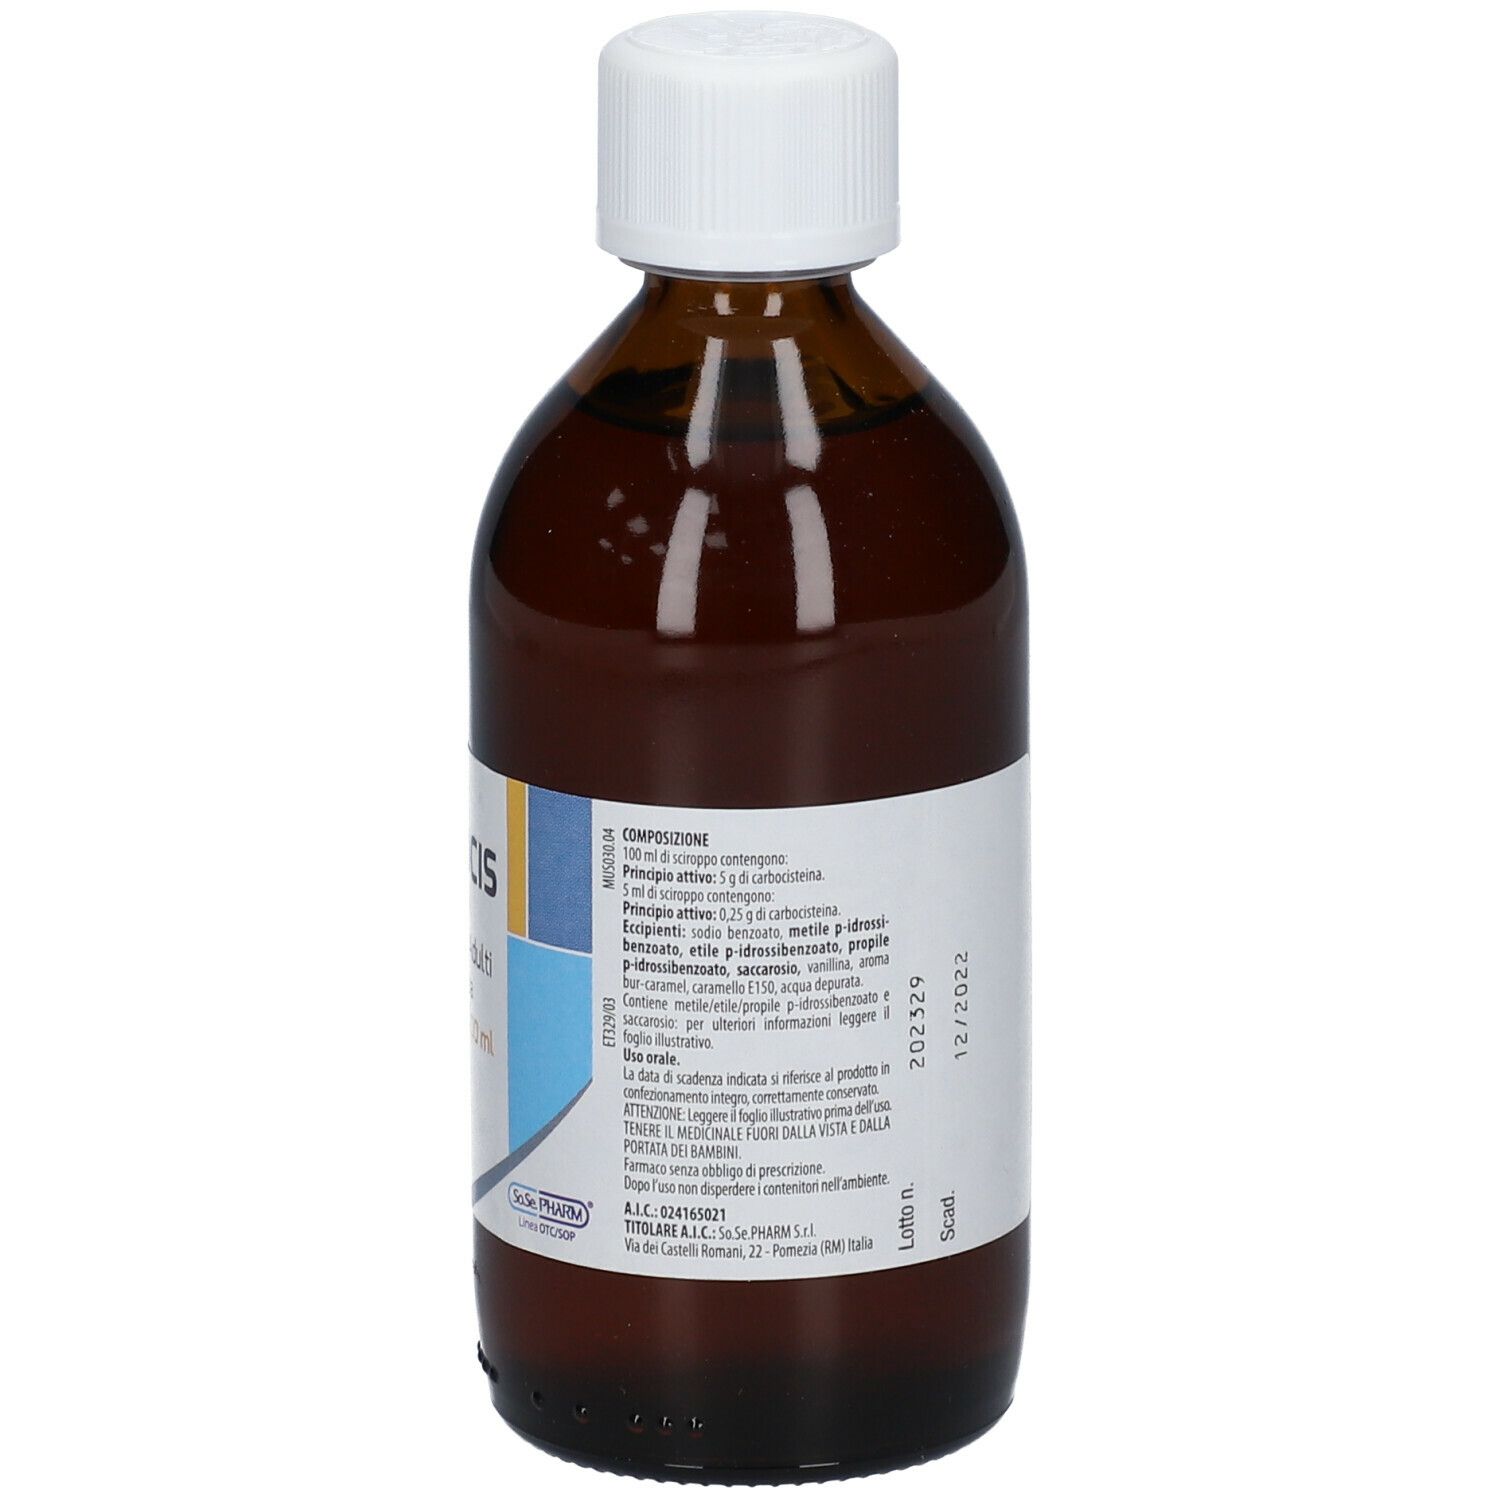 MUCOSIS Adulti 50 mg/ml Sciroppo